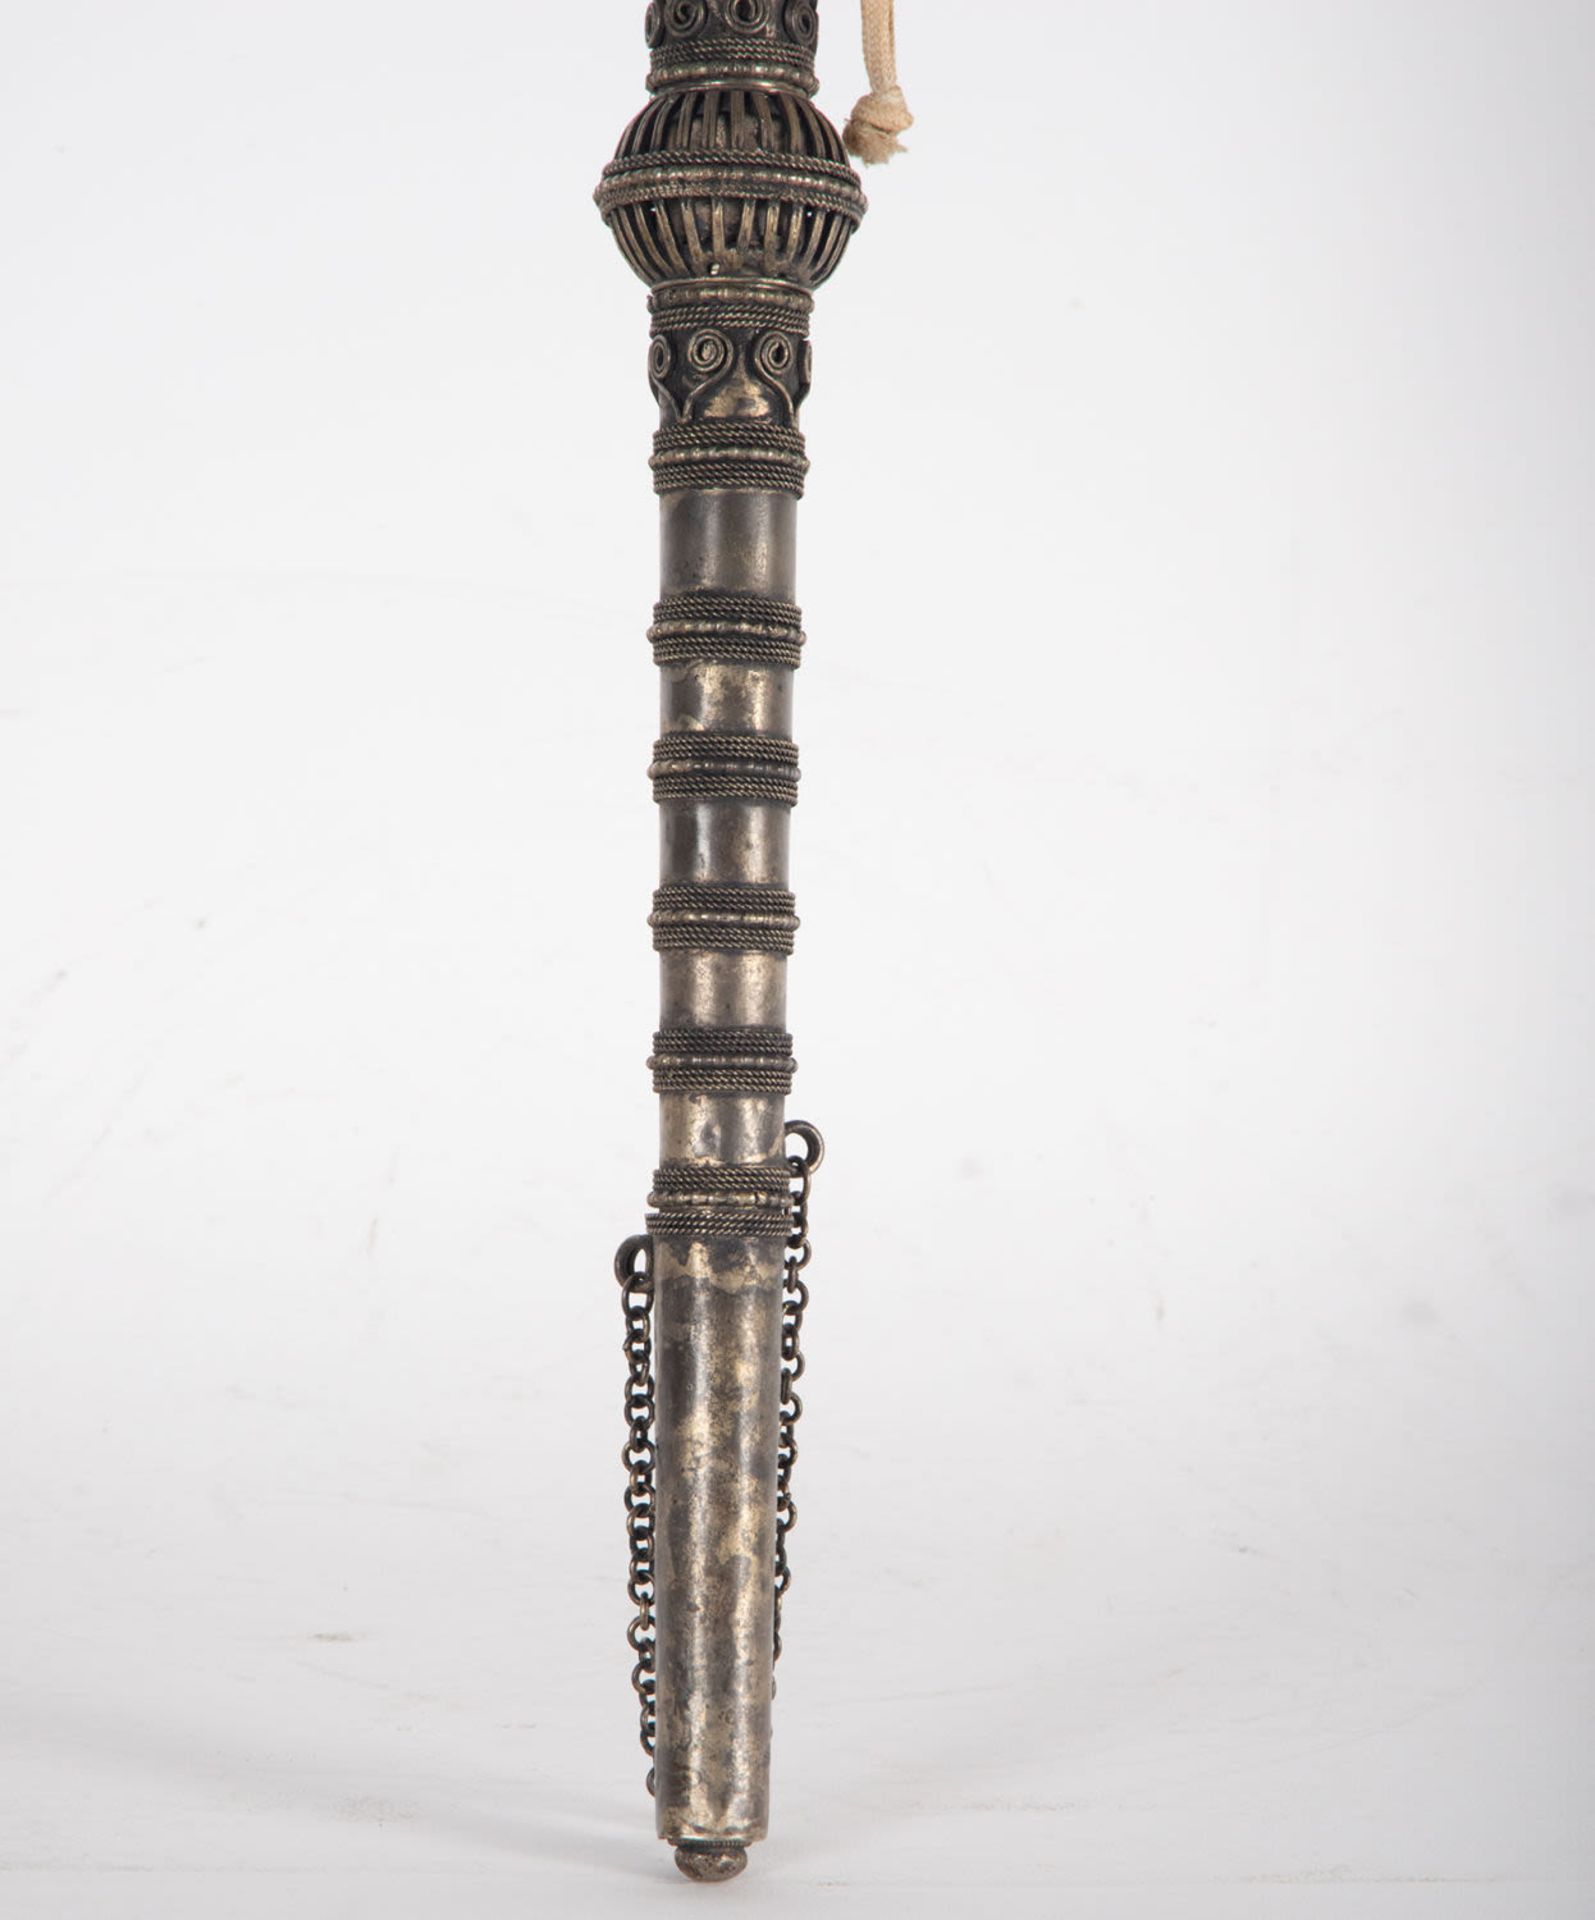 Indonesian Ceremonial Silver Pipe, 19th Century - Image 6 of 8